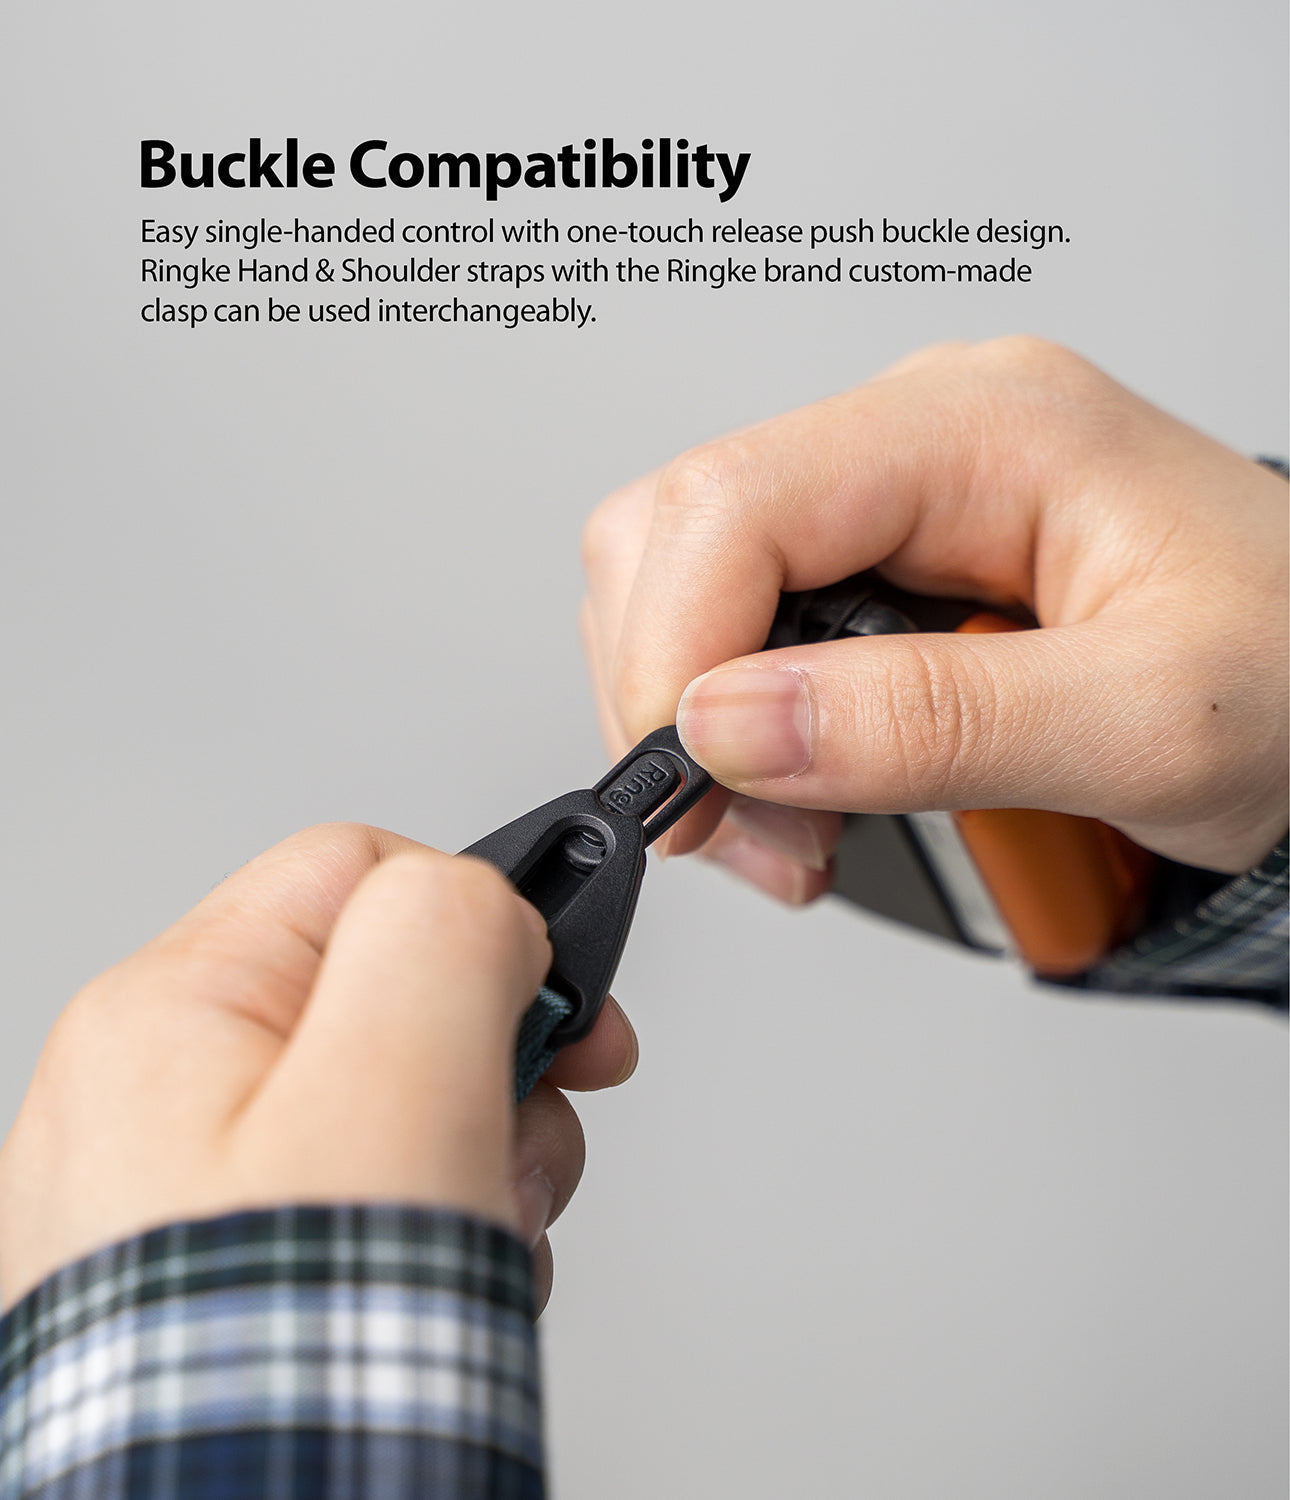 buckle compatiblity - ringke hand and shoulder straps with the ringke brand custom made clasp can be used interchangeably